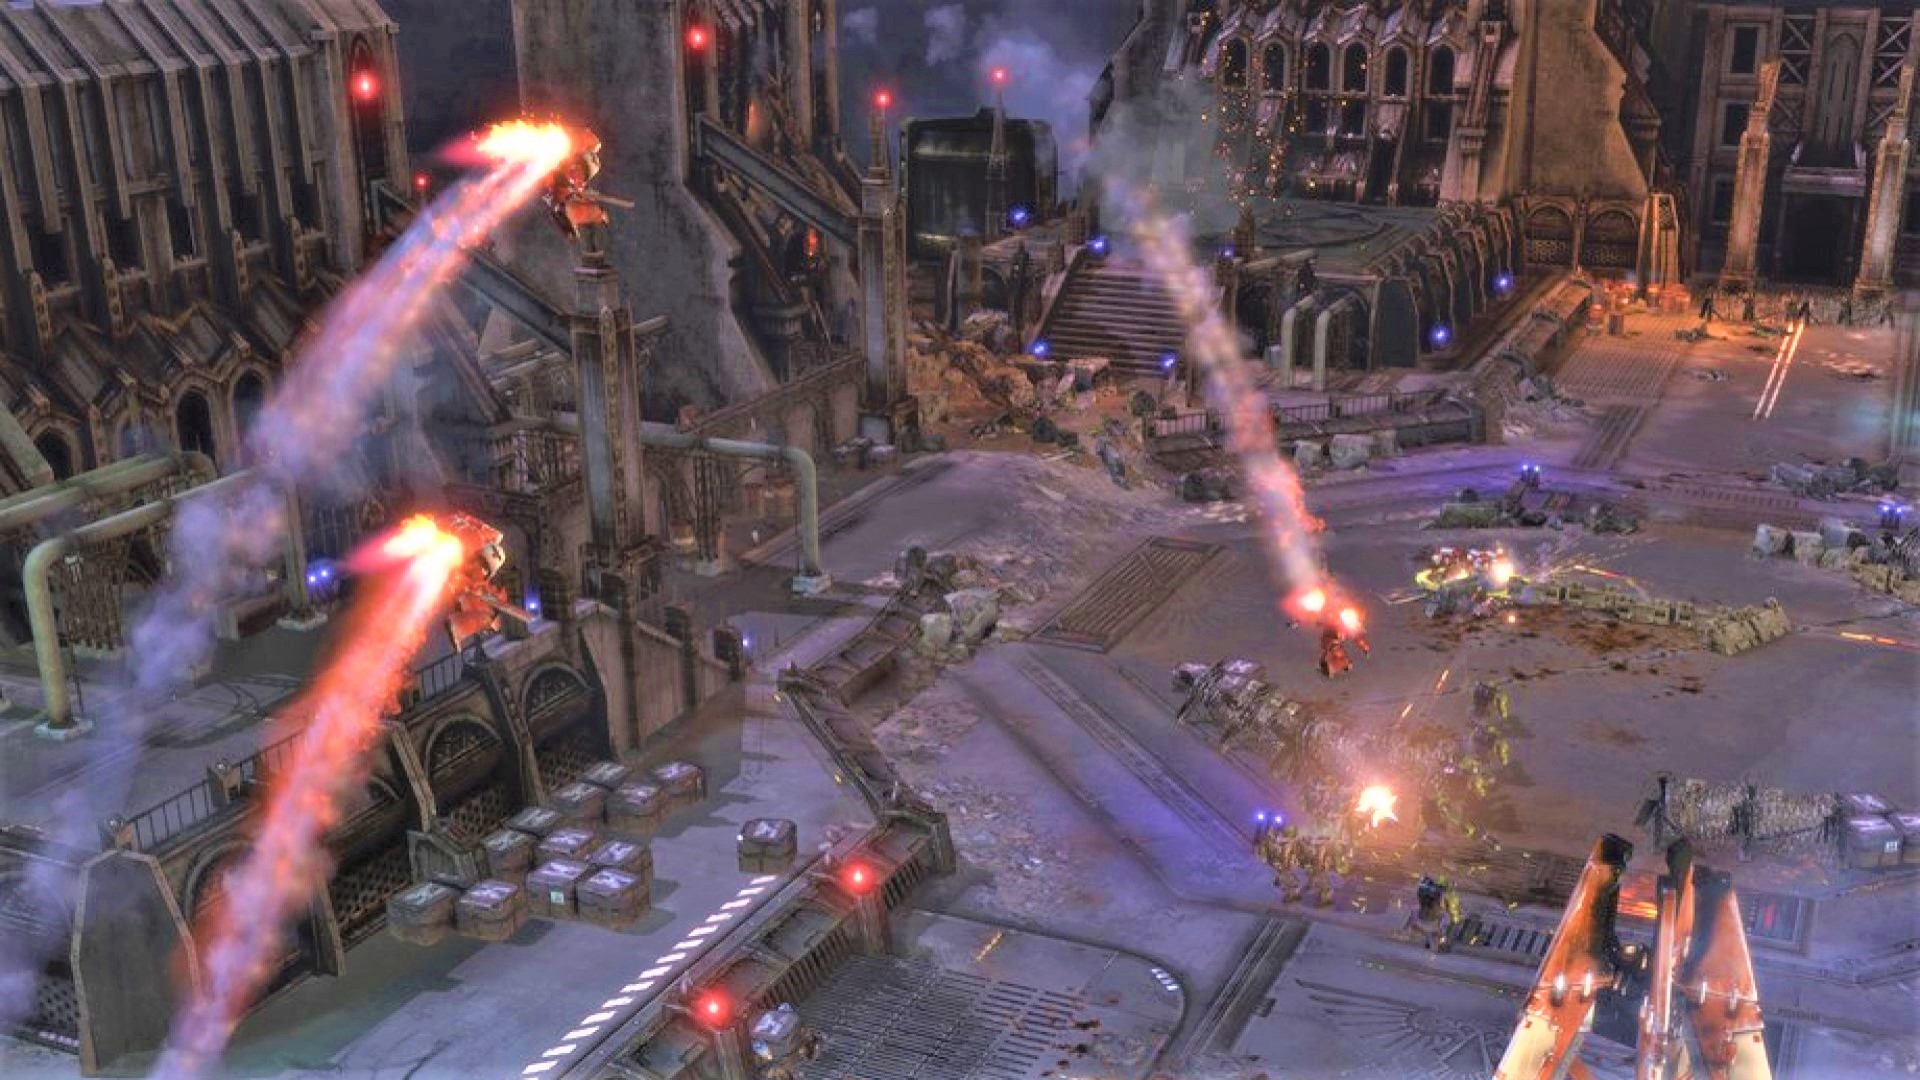 6 best Warhammer 40,000 video games you should play before Space Marine 2